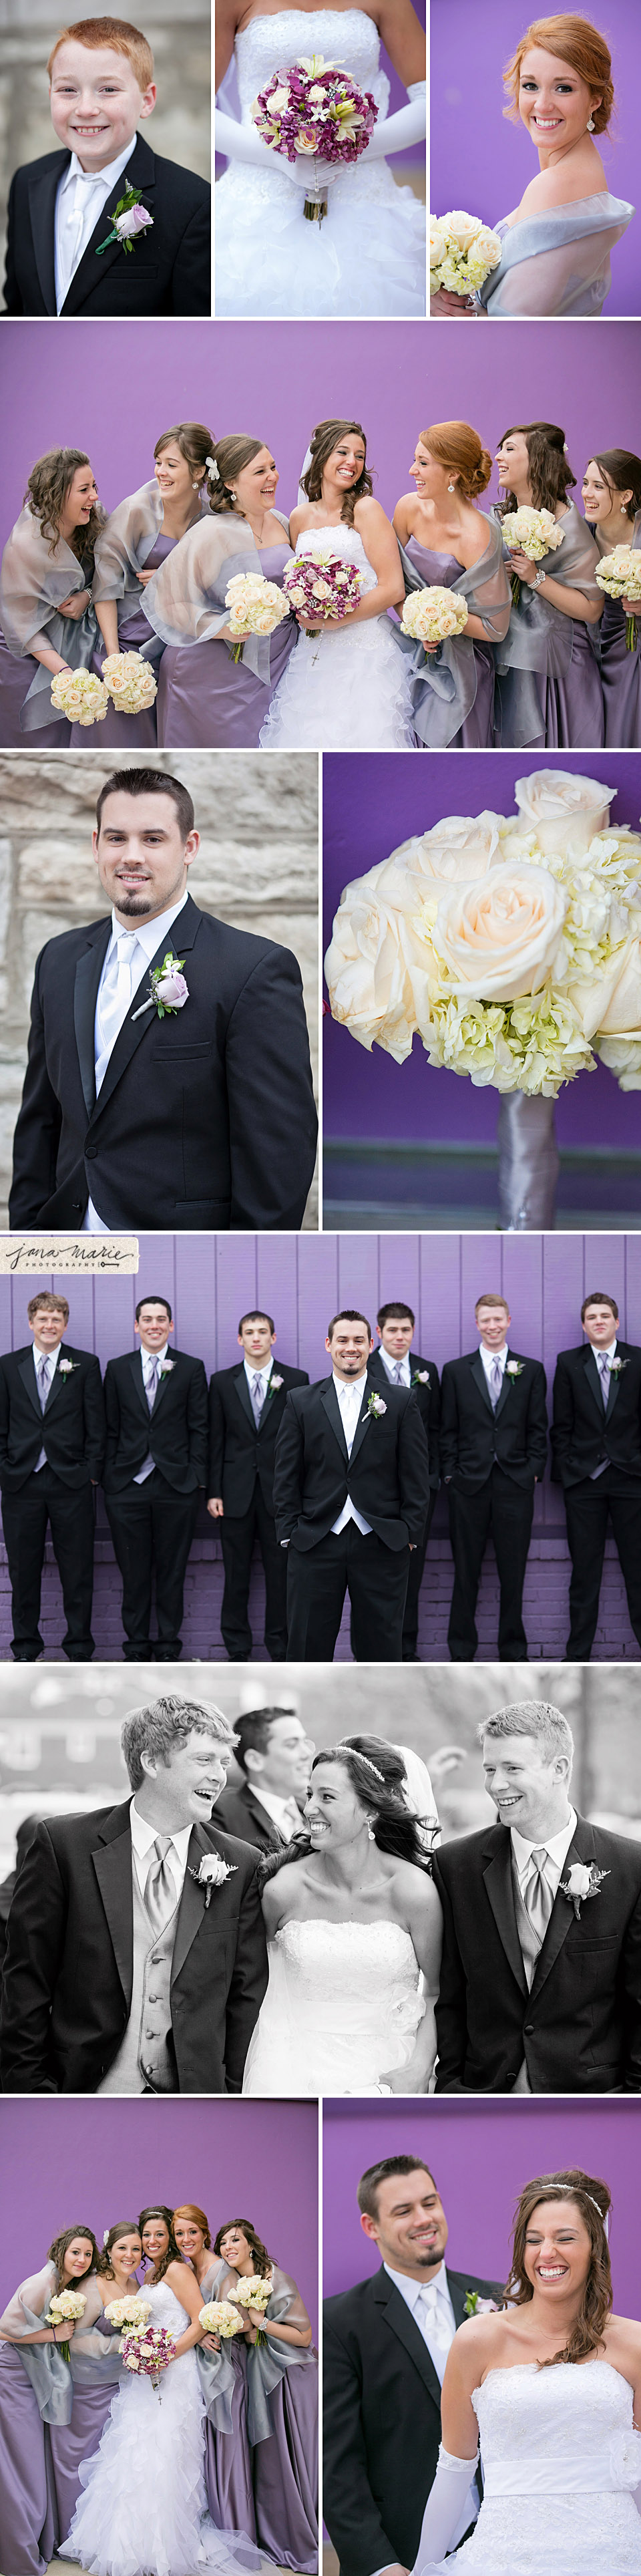 Purple wall, Groomsmen, Flowers, Bouquet, Bridal party pictures, KC weddings, modern photography